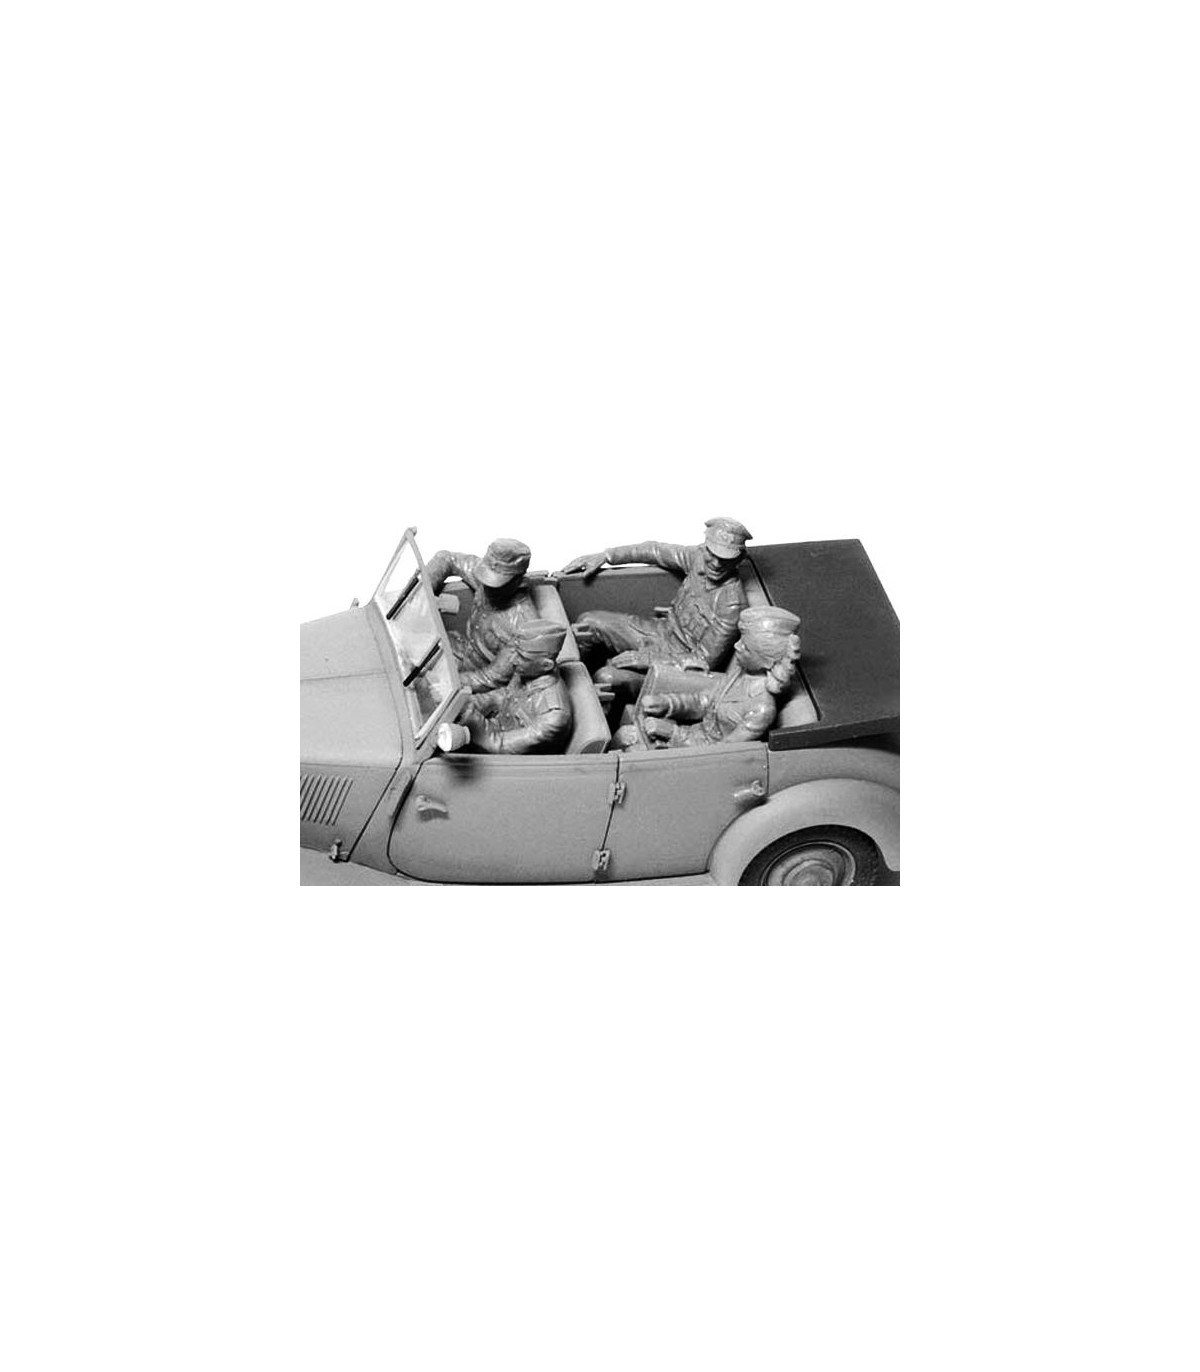 "What are you doing today?" WWII German Military Men  1/35 MasterBox 3570 